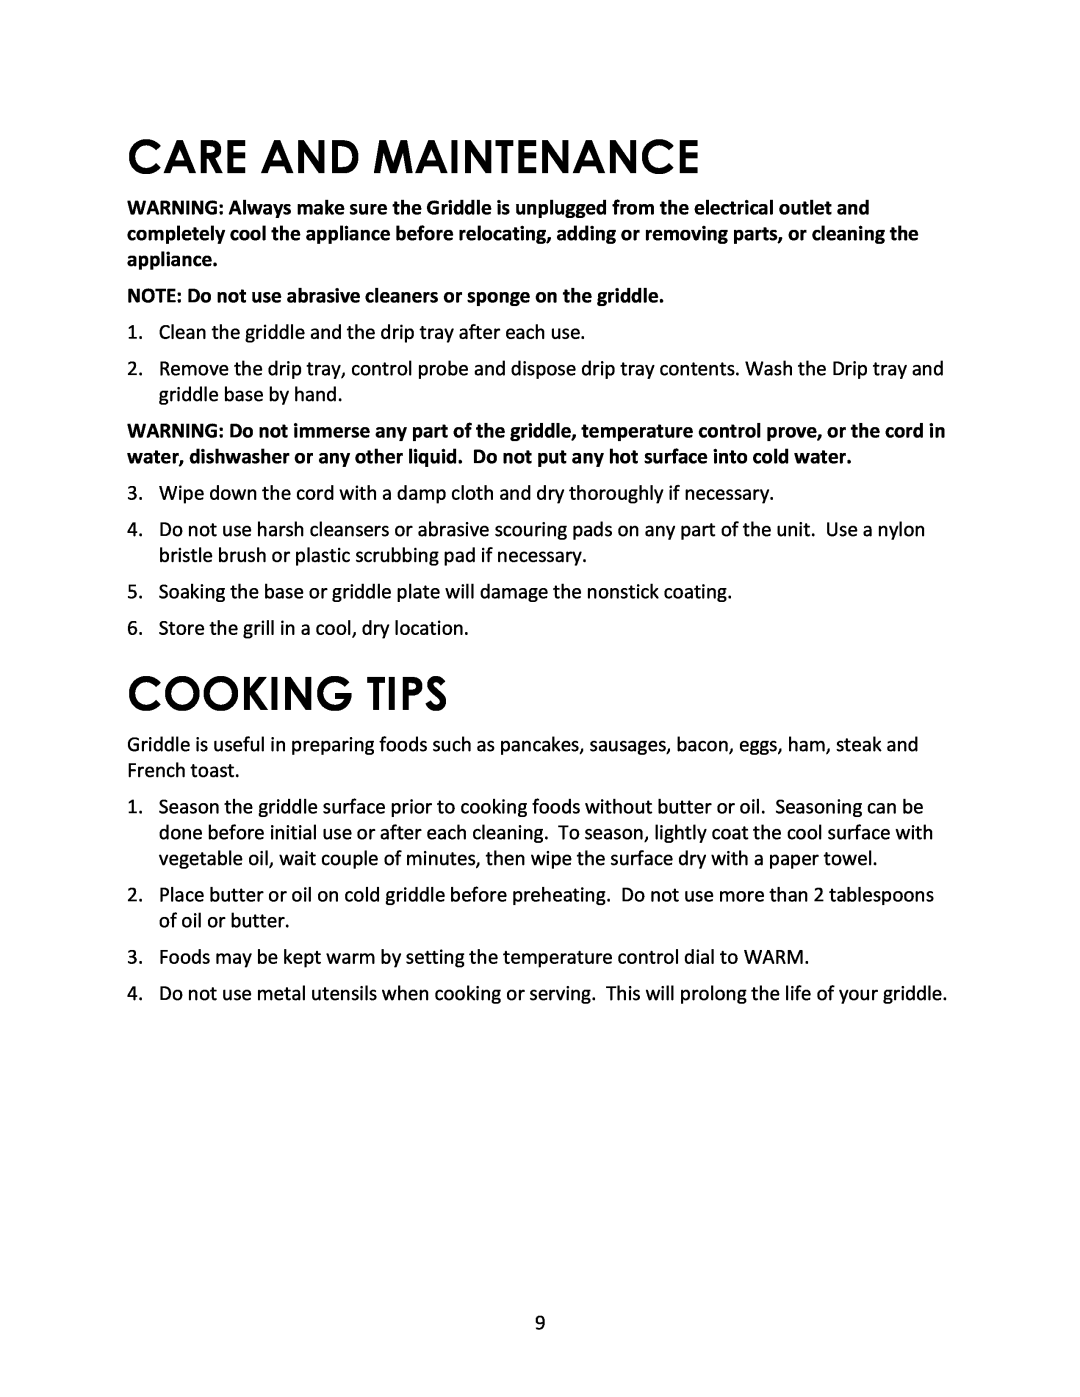 Magic Chef MCSG19B instruction manual Care And Maintenance, Cooking Tips 